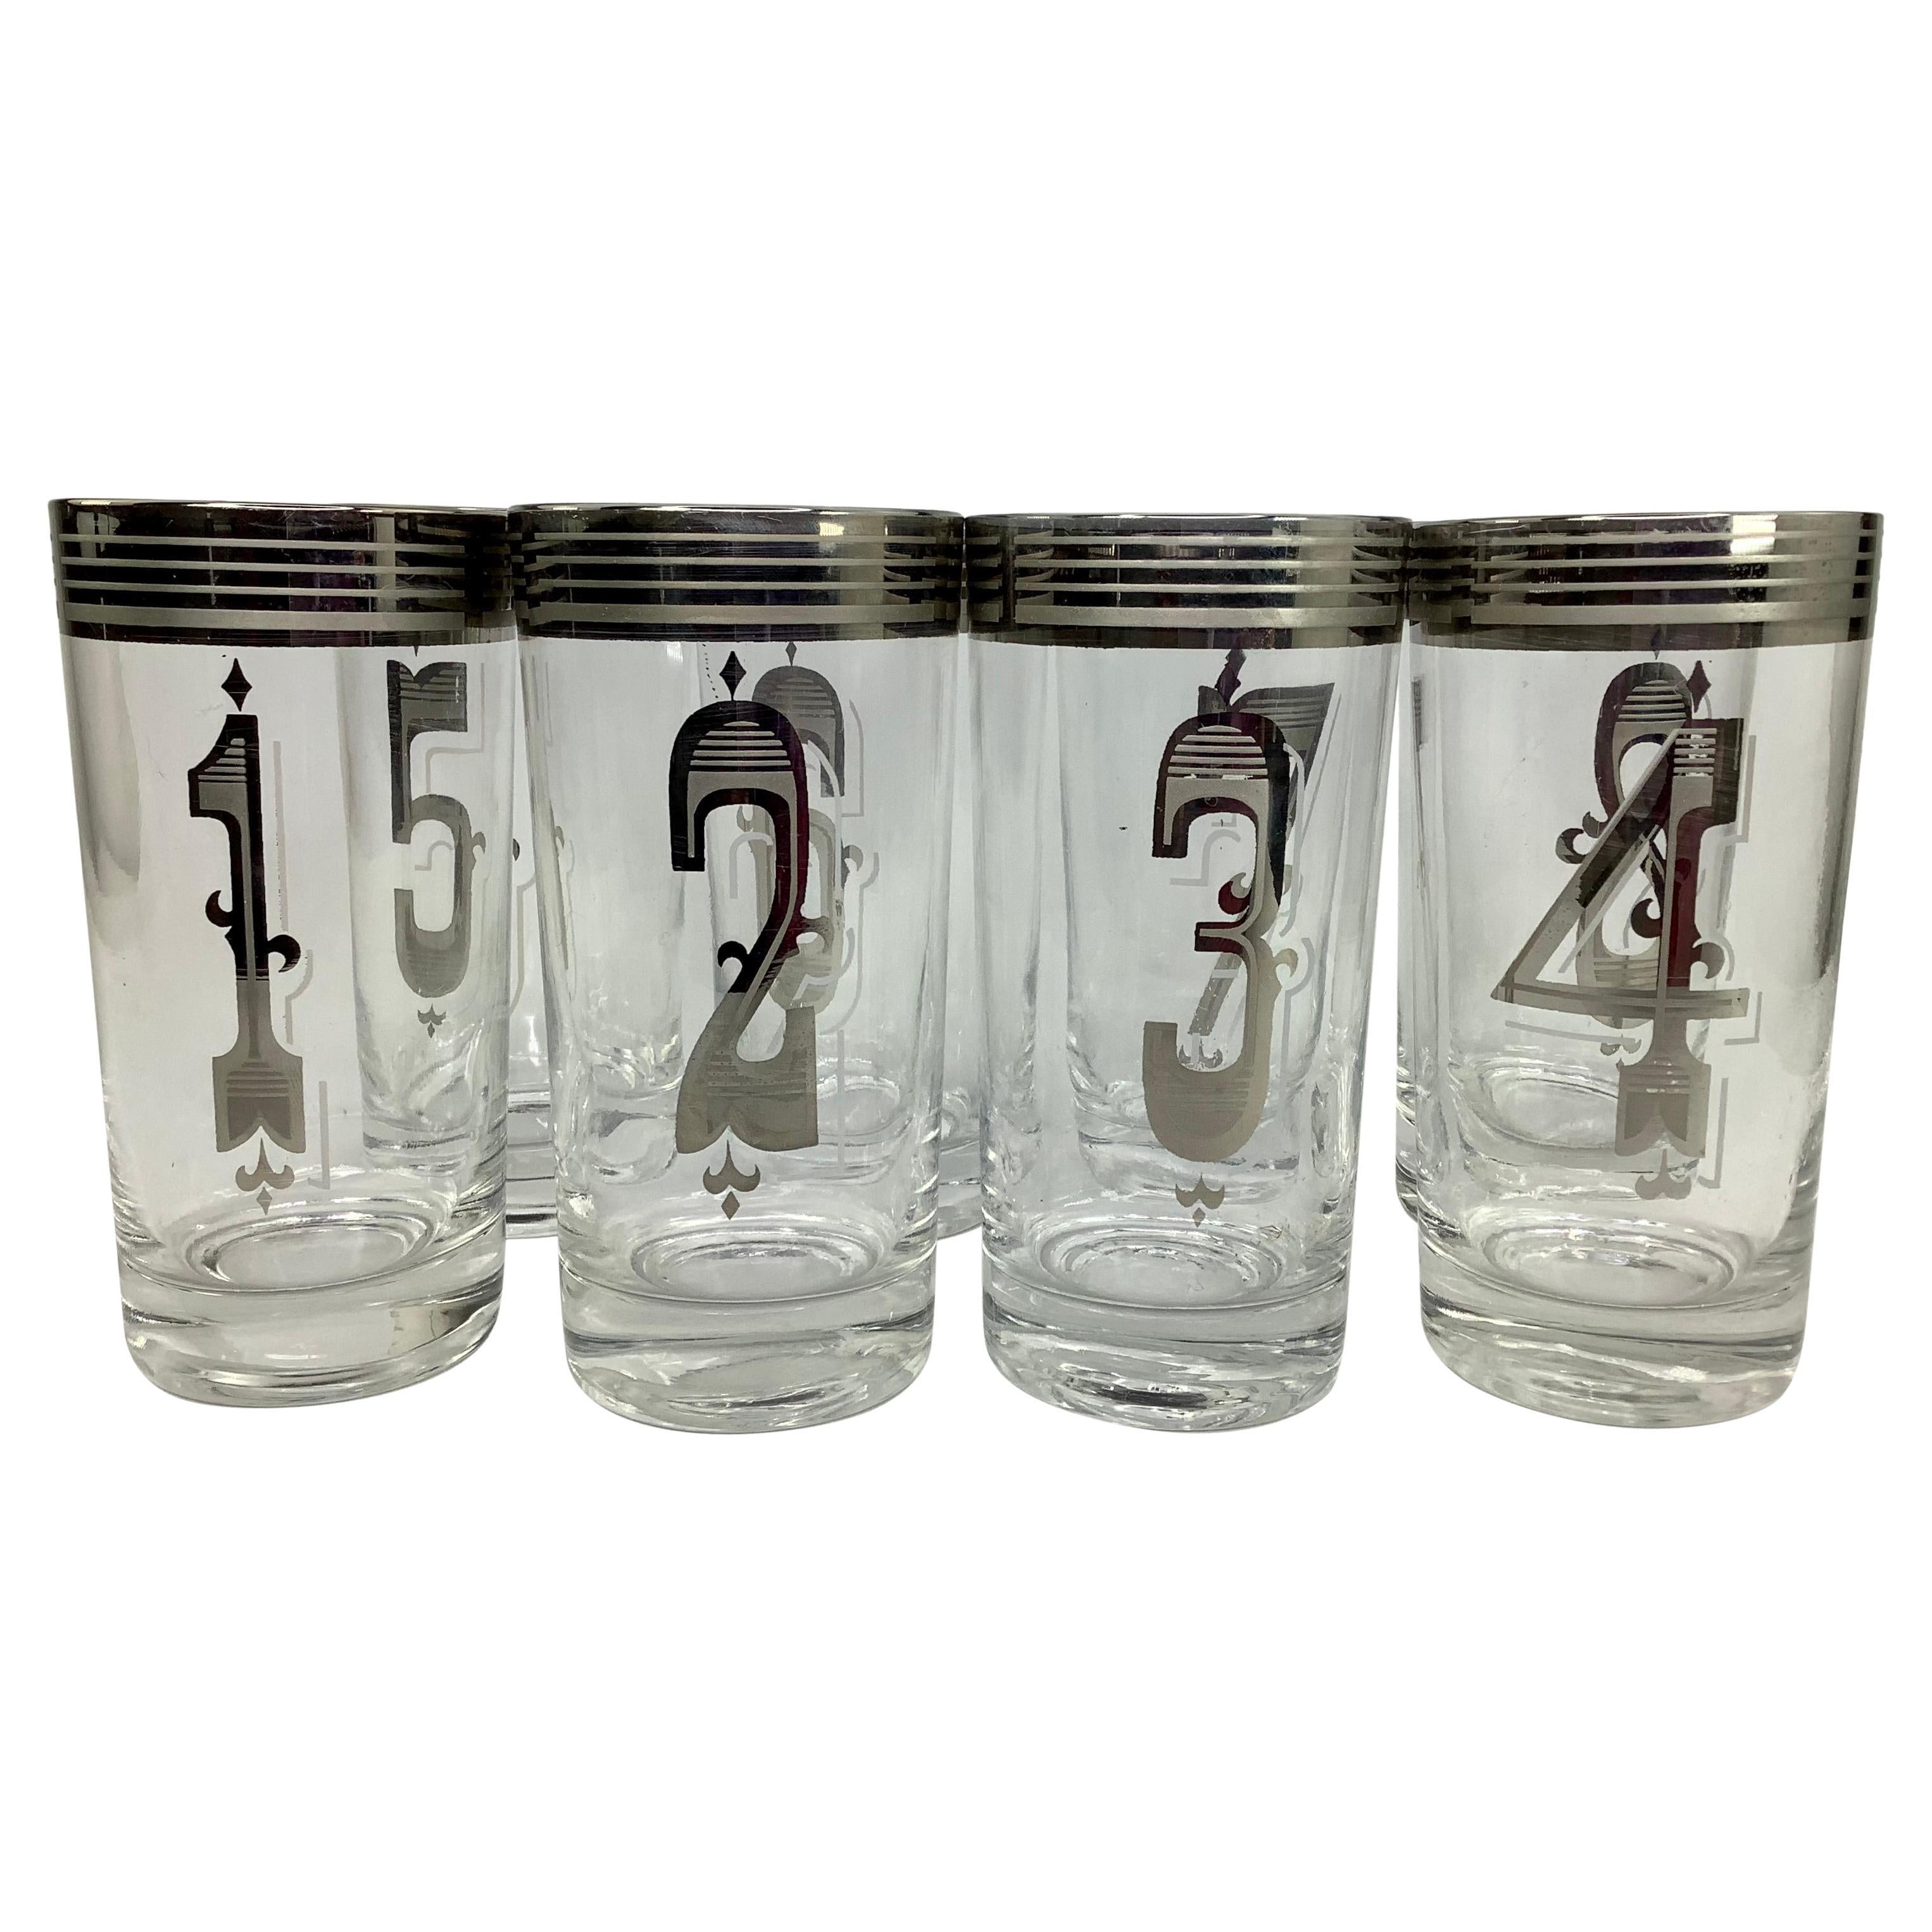 Vintage Drinks by the Numbers Highball Glasses - Set of 8 Numbered Glasses For Sale